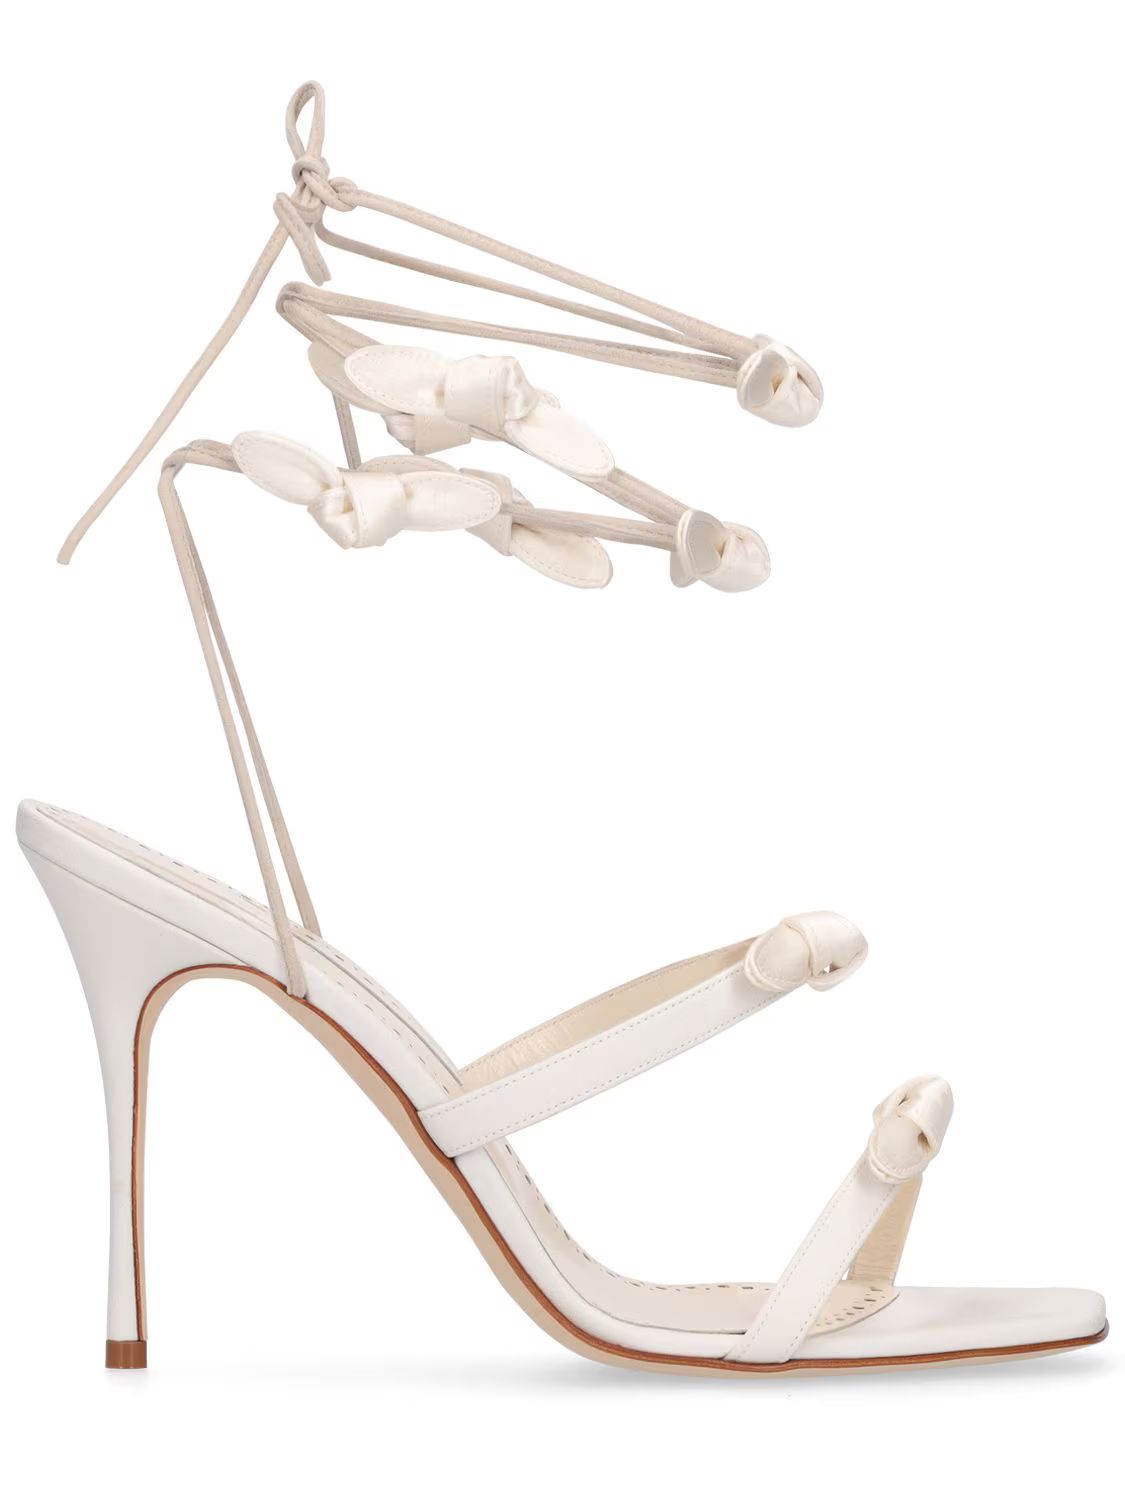 105mm Fiocco Embellished Sandals | Luisaviaroma